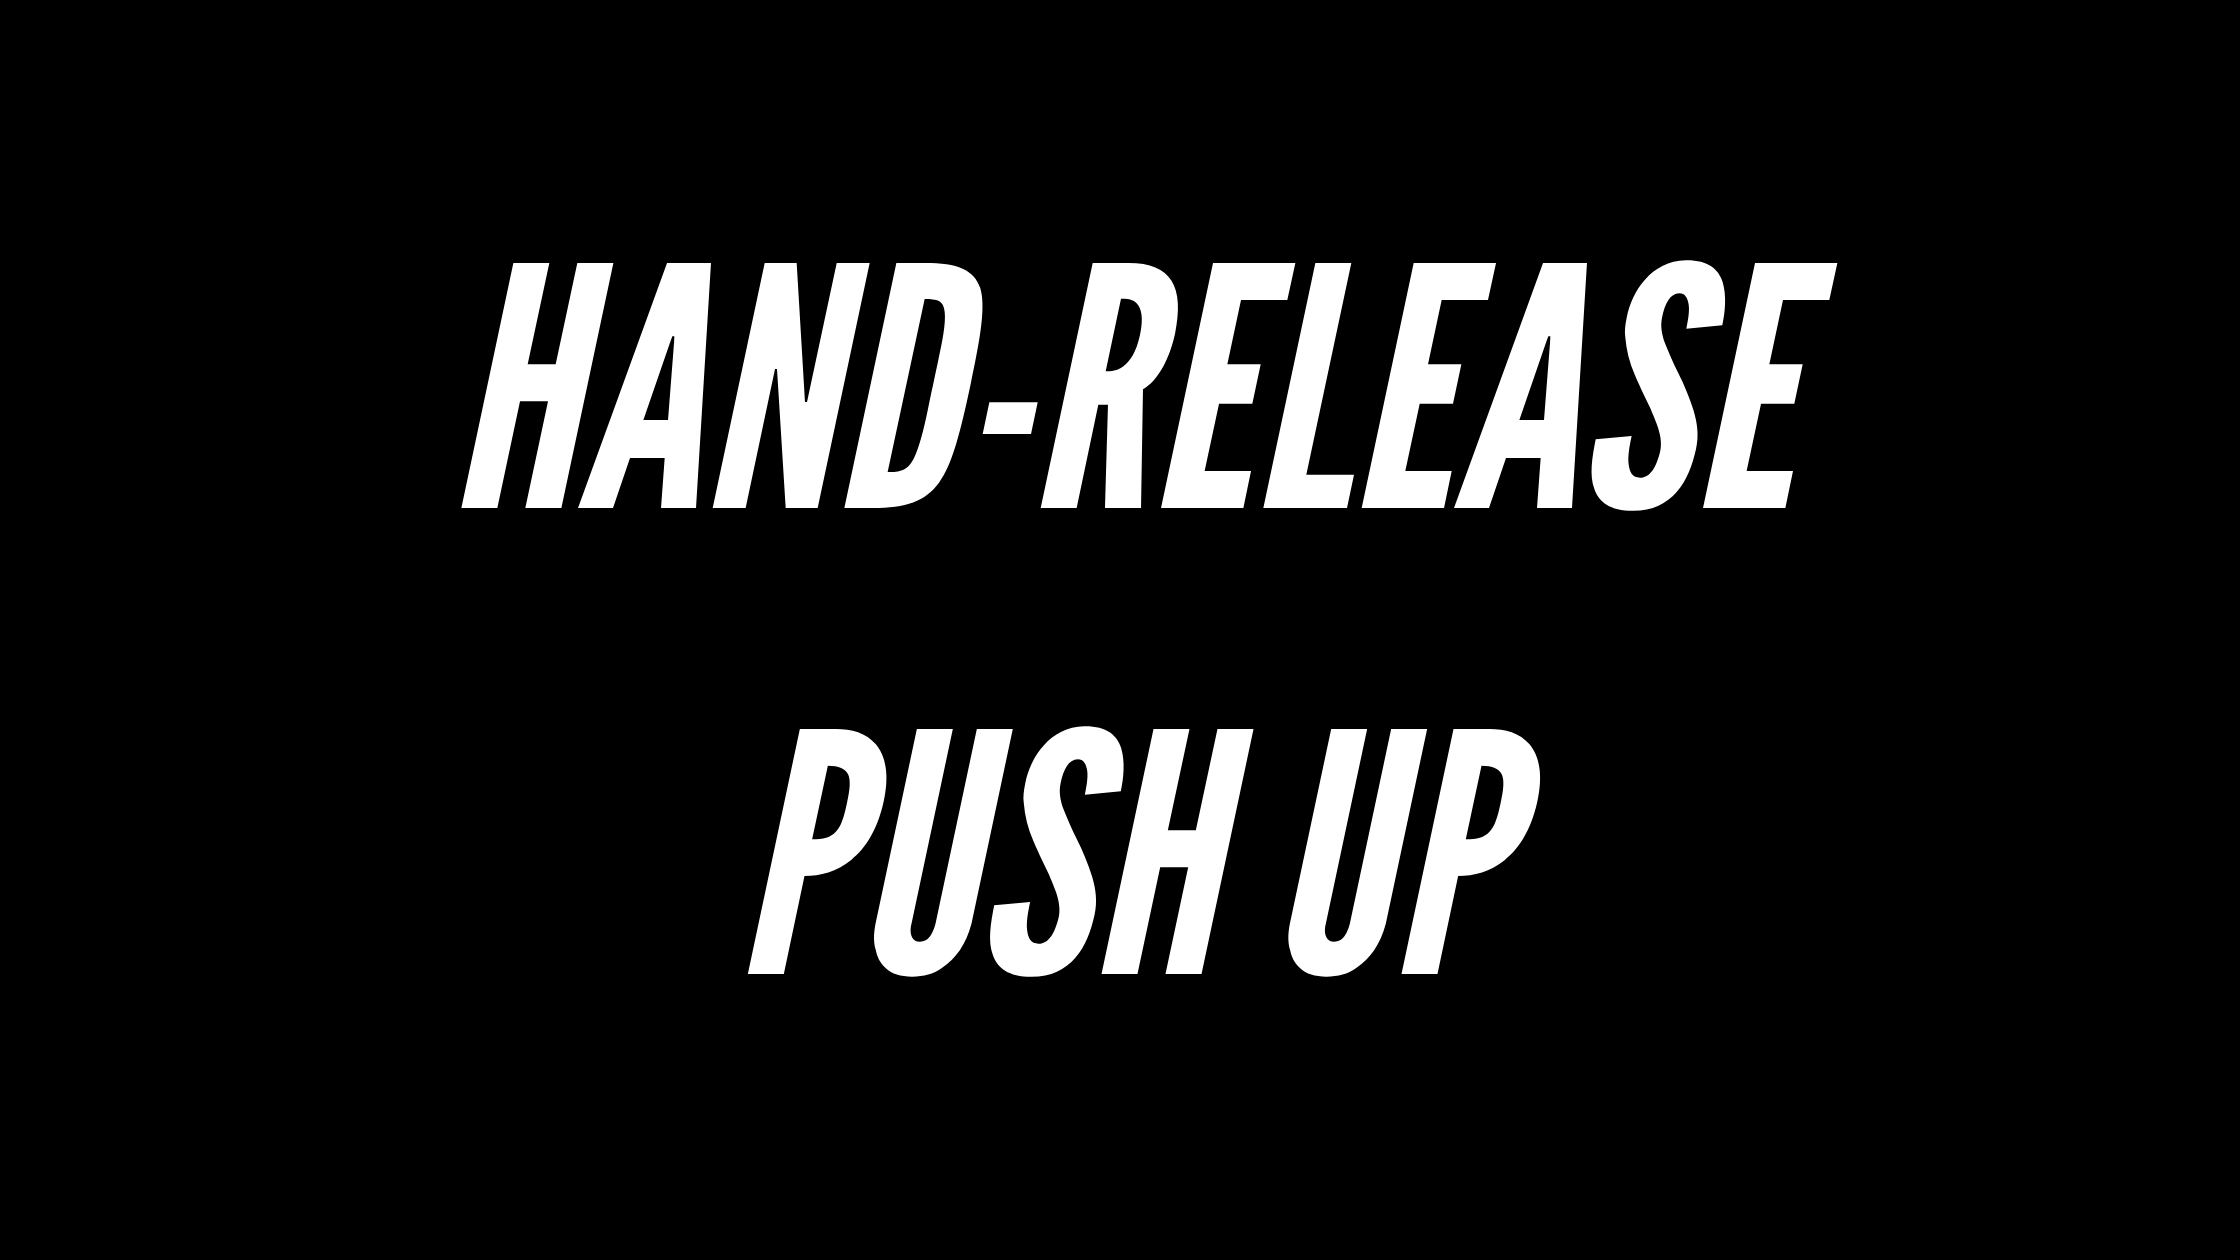 hands-release-push-up